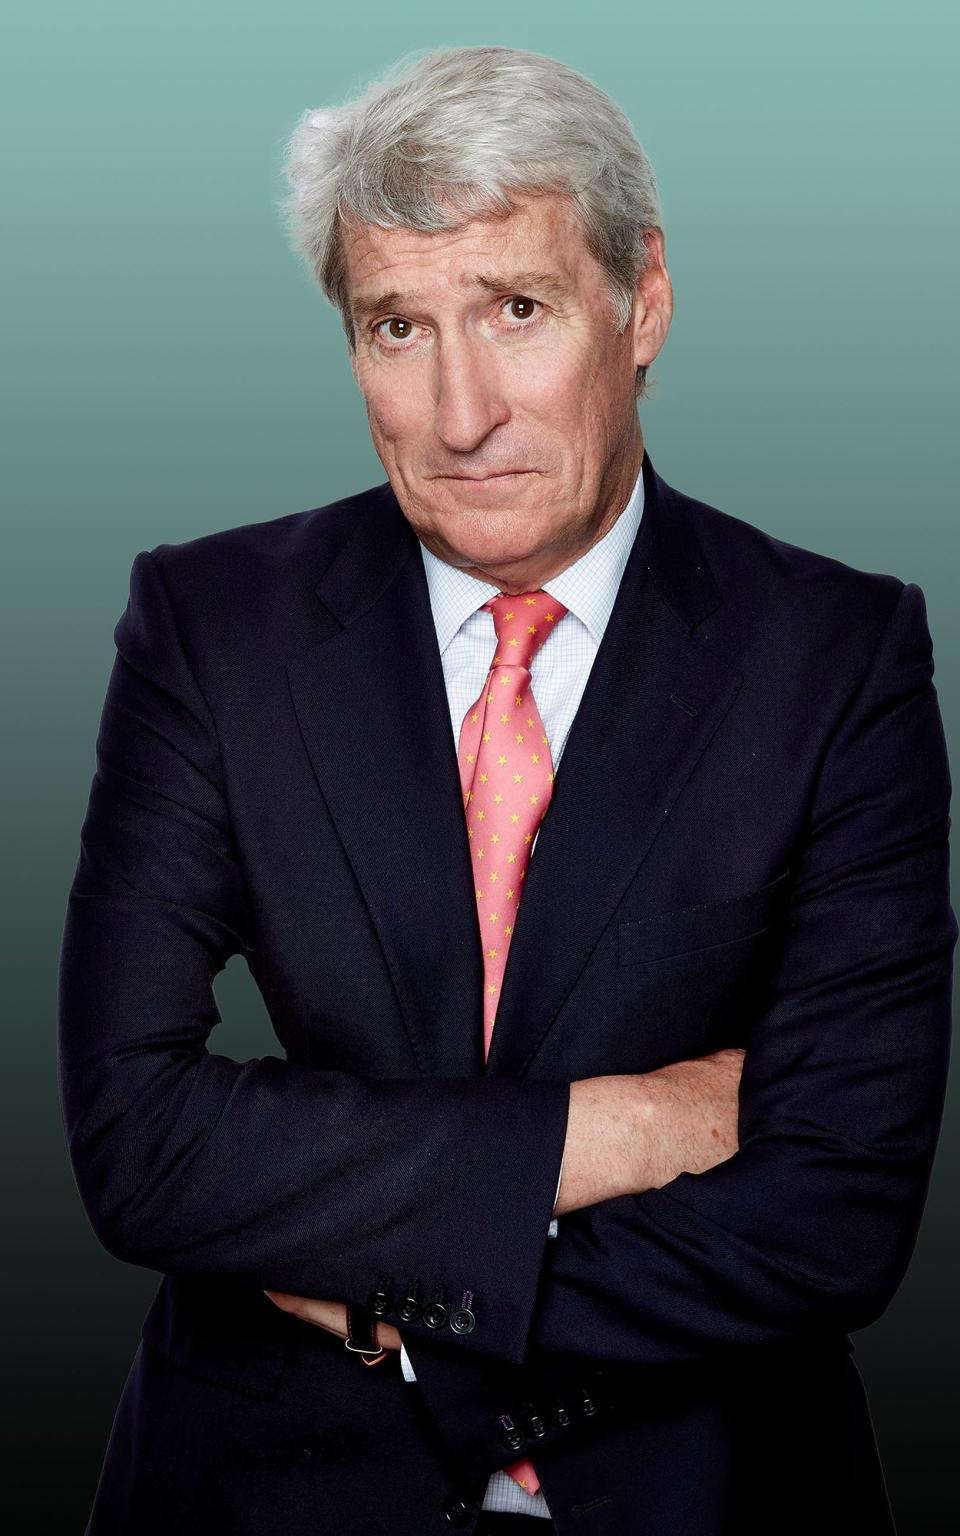 Jeremy Paxman isn't impressed - Credit: Nicky Johnson/Channel 4 images